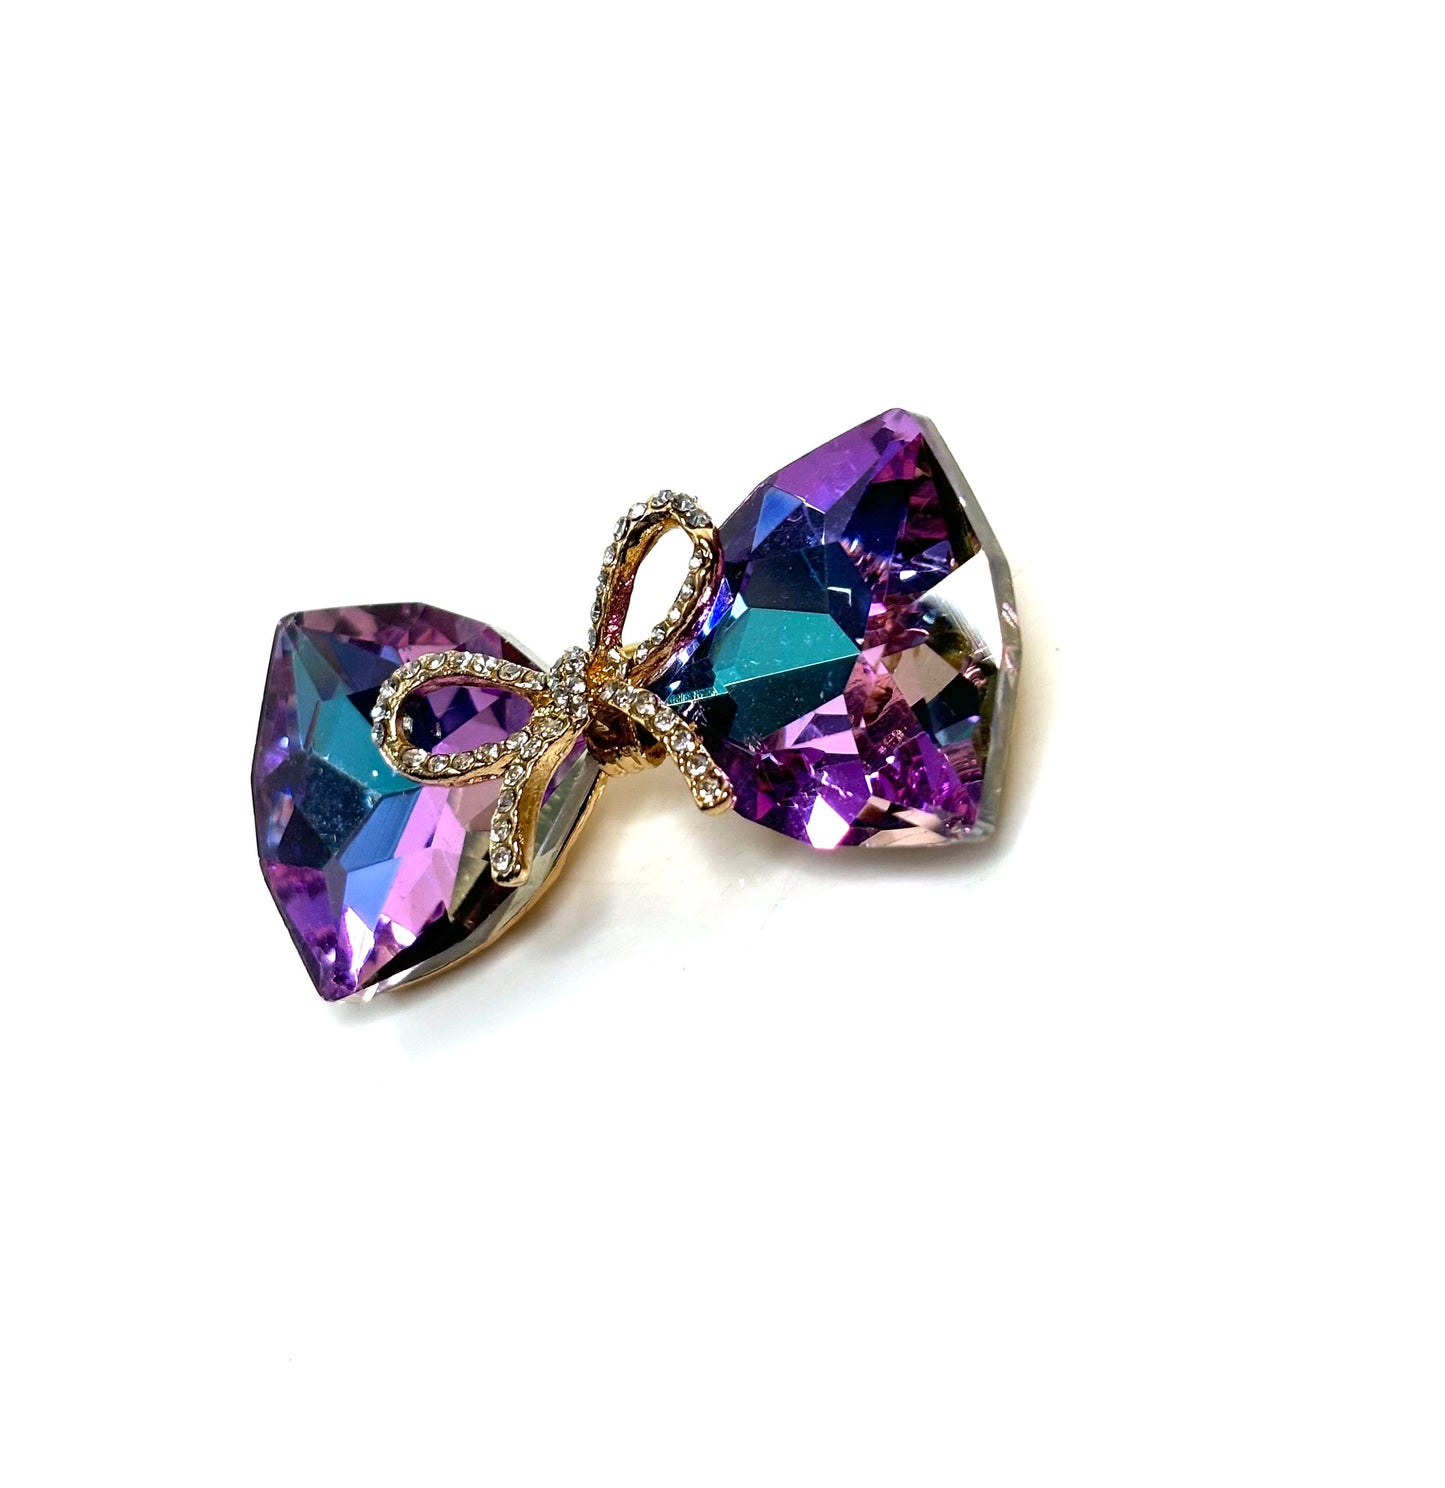 Gorgeous Vintage Style Glass Bow Brooch, Rhinestone Crystal Jewelry, Purple Rainbow Sparkly Bow, Brooches For Women